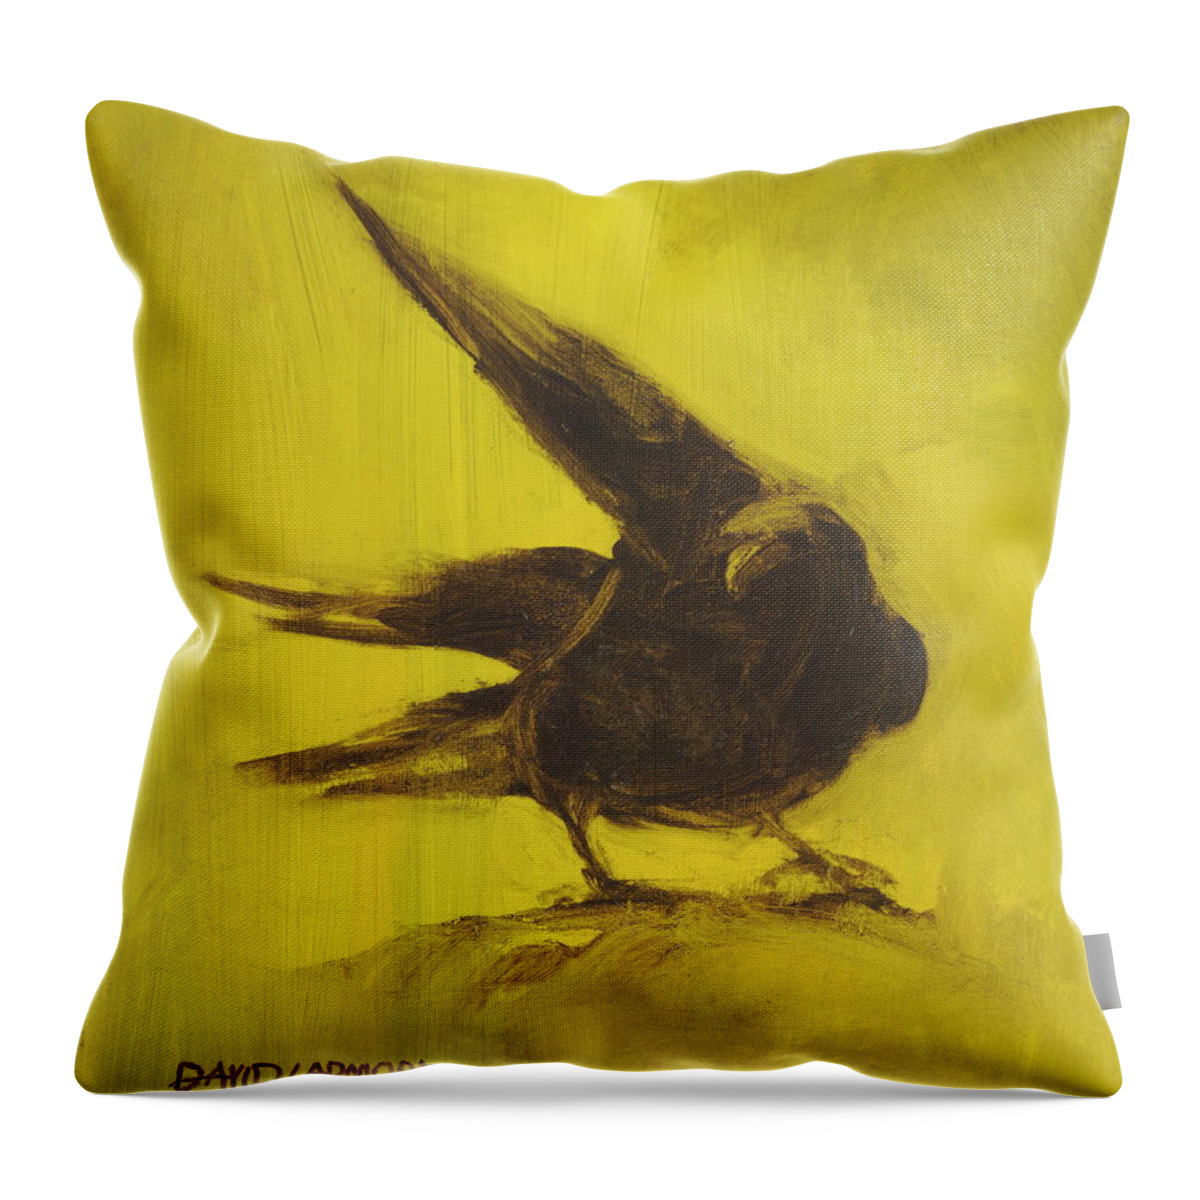 Crow Throw Pillow featuring the painting Crow 2 by David Ladmore